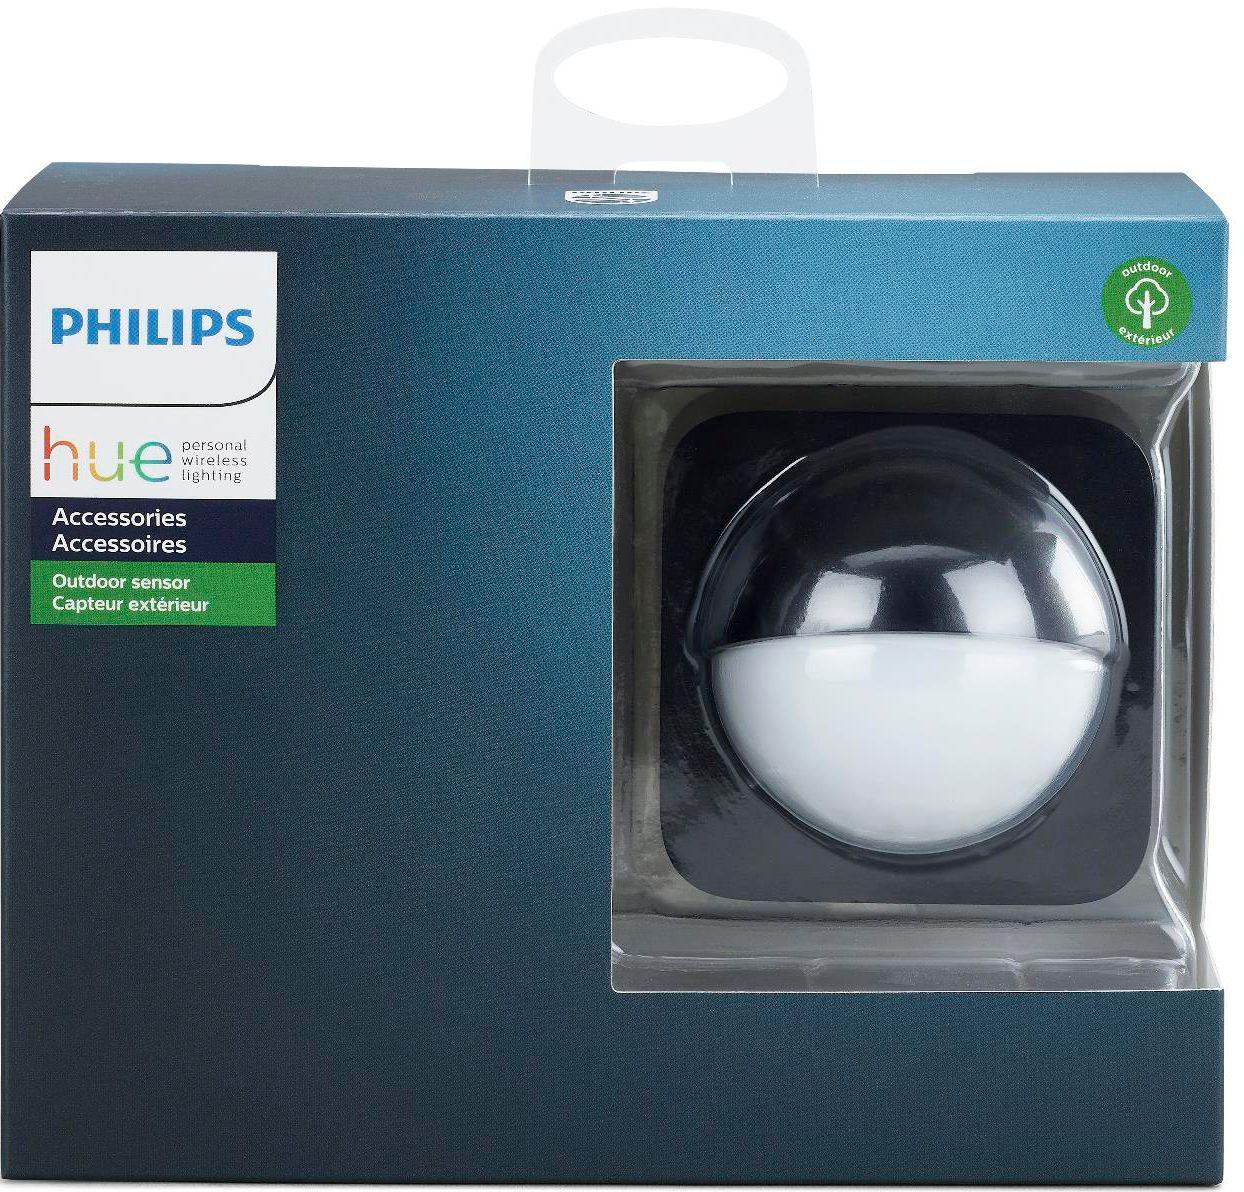 Philips Hue Dusk-to-Dawn Outdoor Motion Sensor for $27.99